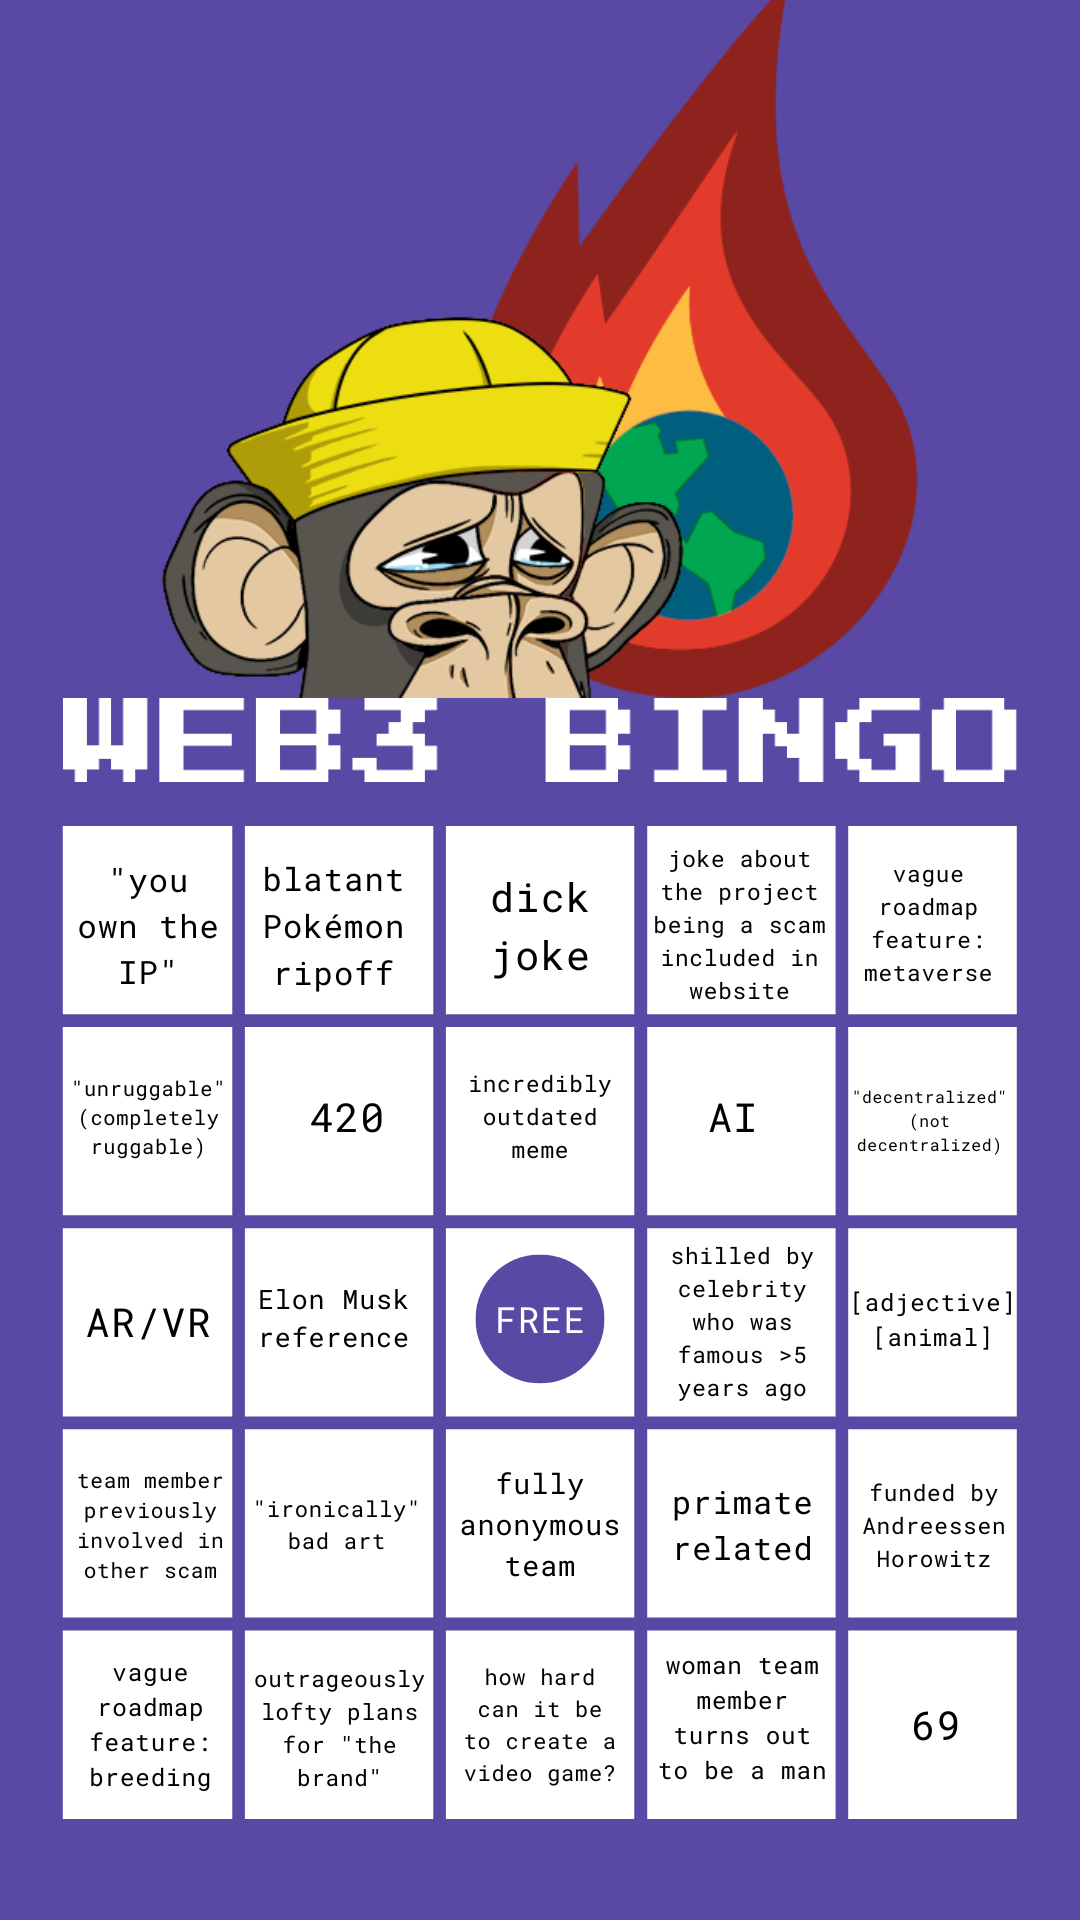 Web3 bingo card, with ape and earth in flames graphic from Web3 is Going Great. Squares read: "you own the IP" / "unruggable" (completely ruggable) / AR/VR / team member previously involved in other scam / vague roadmap feature: breeding / blatant Pokémon ripoff / 420 / Elon Musk reference / "ironically" bad art / outrageously lofty plans for "the brand" / dick joke / incredibly outdated meme / fully anonymous team / how hard can it be to create a video game? / joke about the project being a scam included in website / AI / primate related / woman team member turns out to be a man / "decentralized" (not decentralized) / [adjective] [animal] / funded by Andreessen Horowitz / 69 / FREE / vague roadmap feature: metaverse / shilled by celebrity who was famous >5 years ago